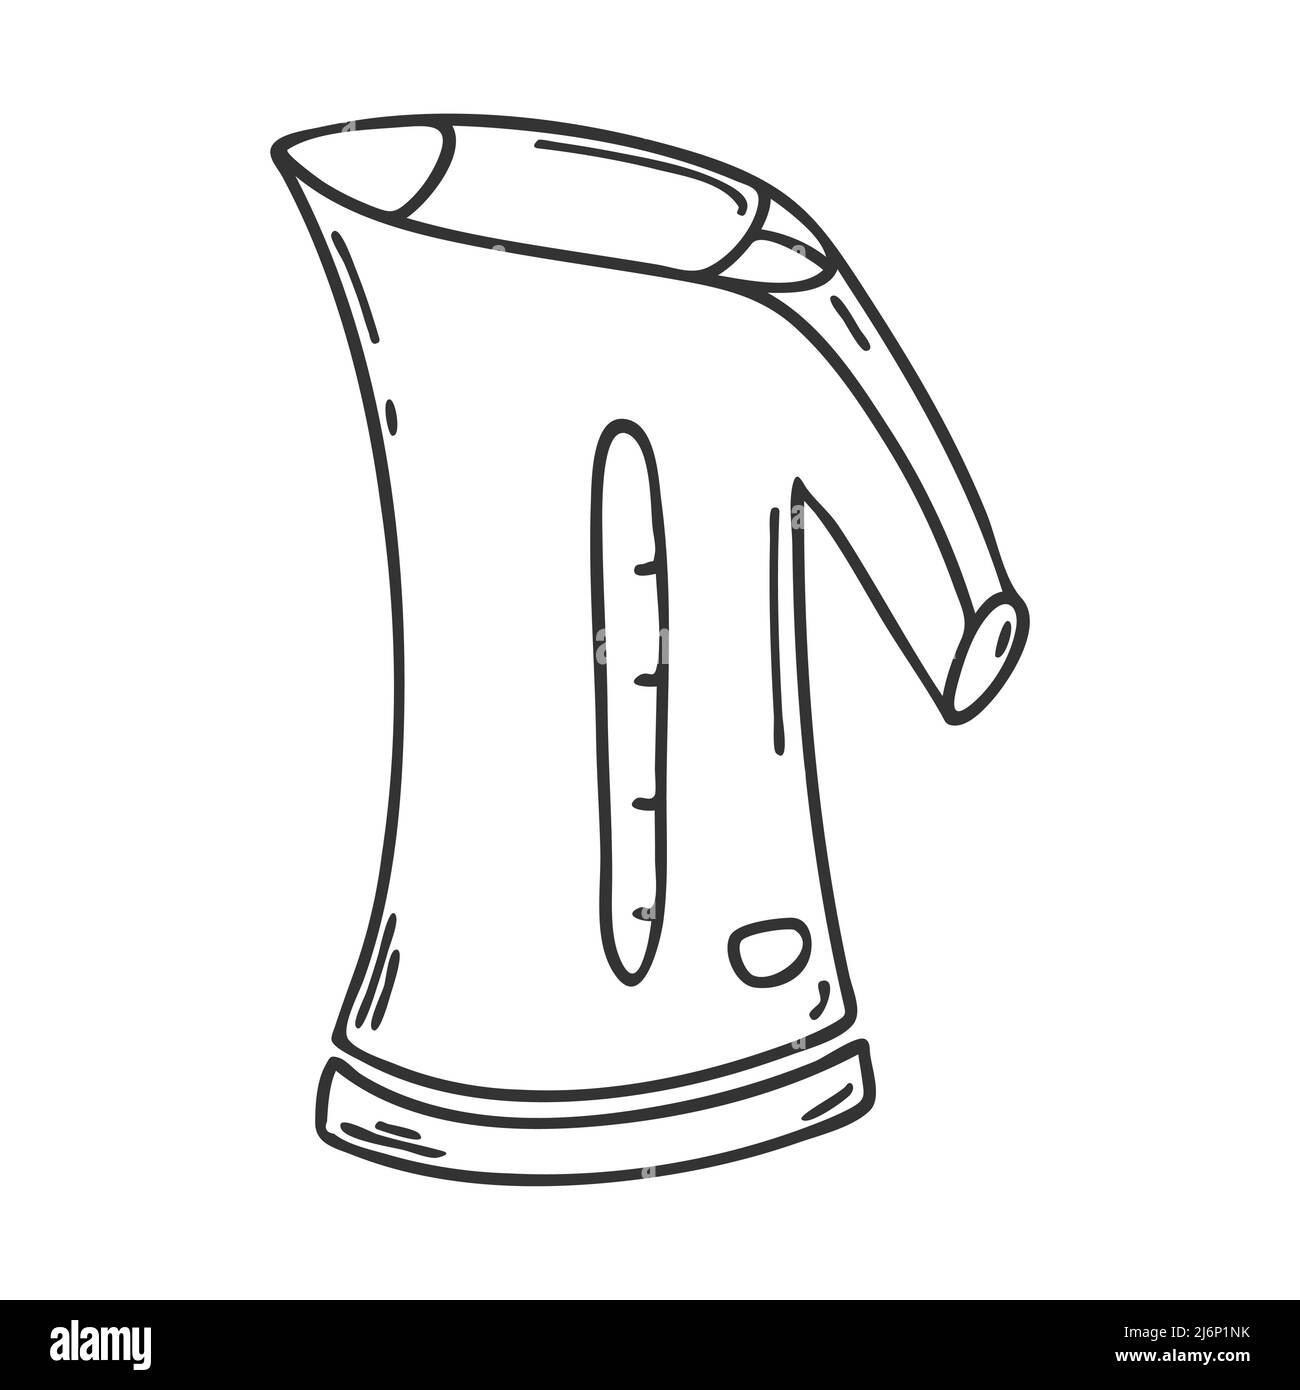 Doodle style electric kettle. Kitchen appliance for boiling water. Design can be used to decorate menus, recipes, food packaging. Hand drawn and isola Stock Vector